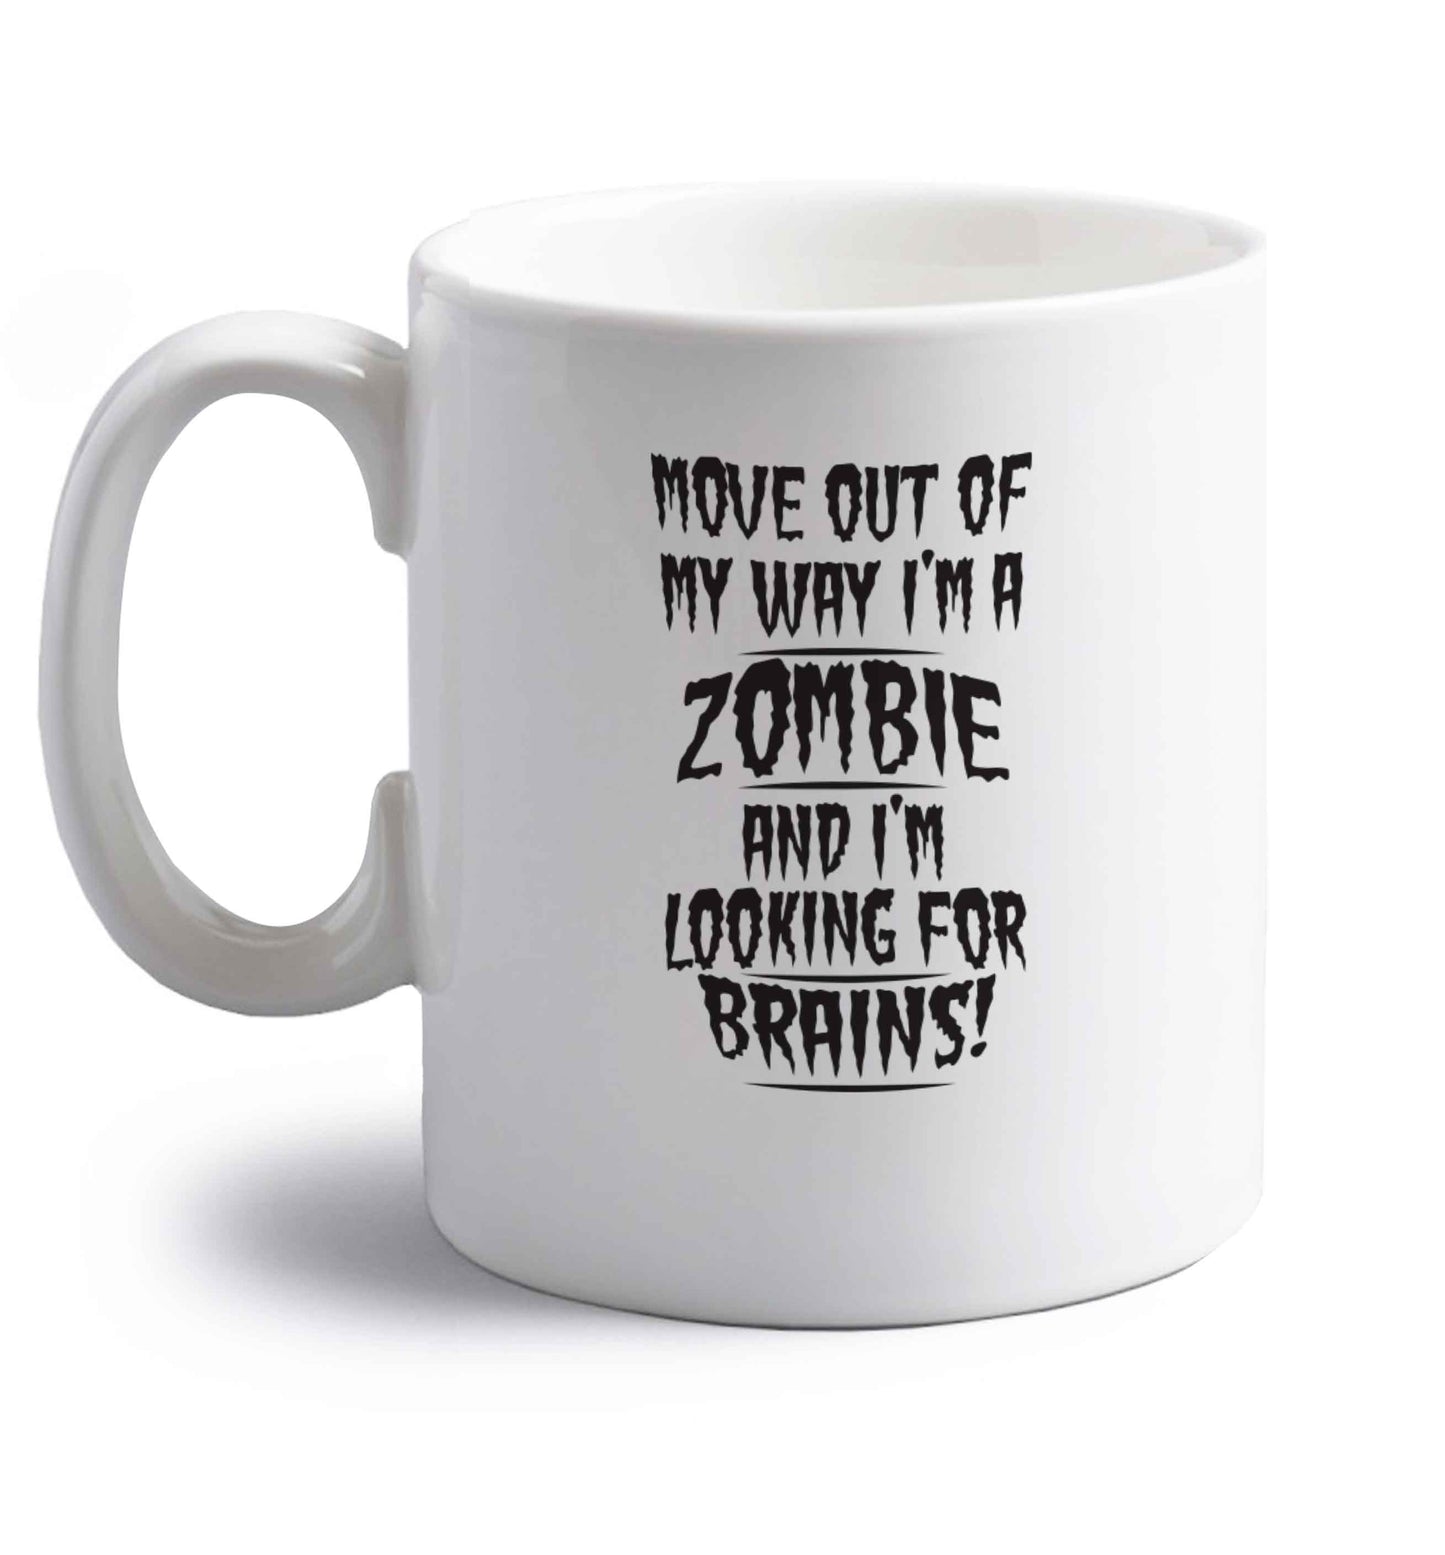 I'm a zombie and I'm looking for brains! right handed white ceramic mug 